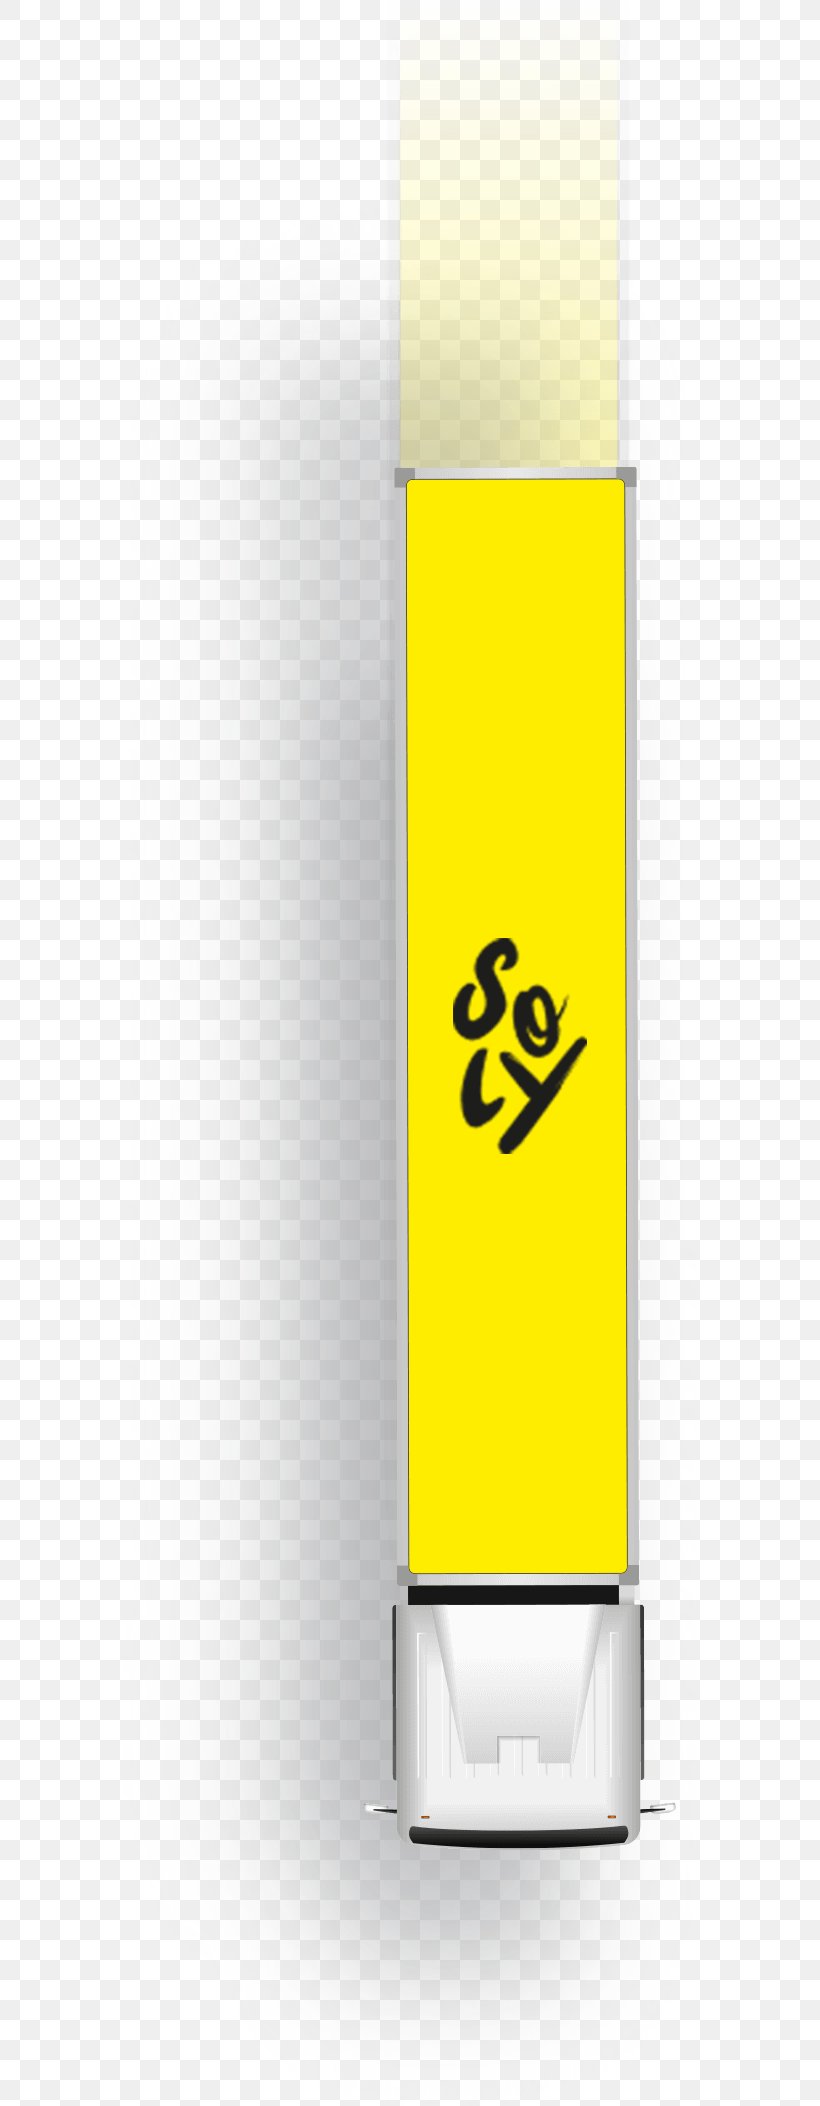 Brand Technology, PNG, 574x2106px, Brand, Technology, Yellow Download Free